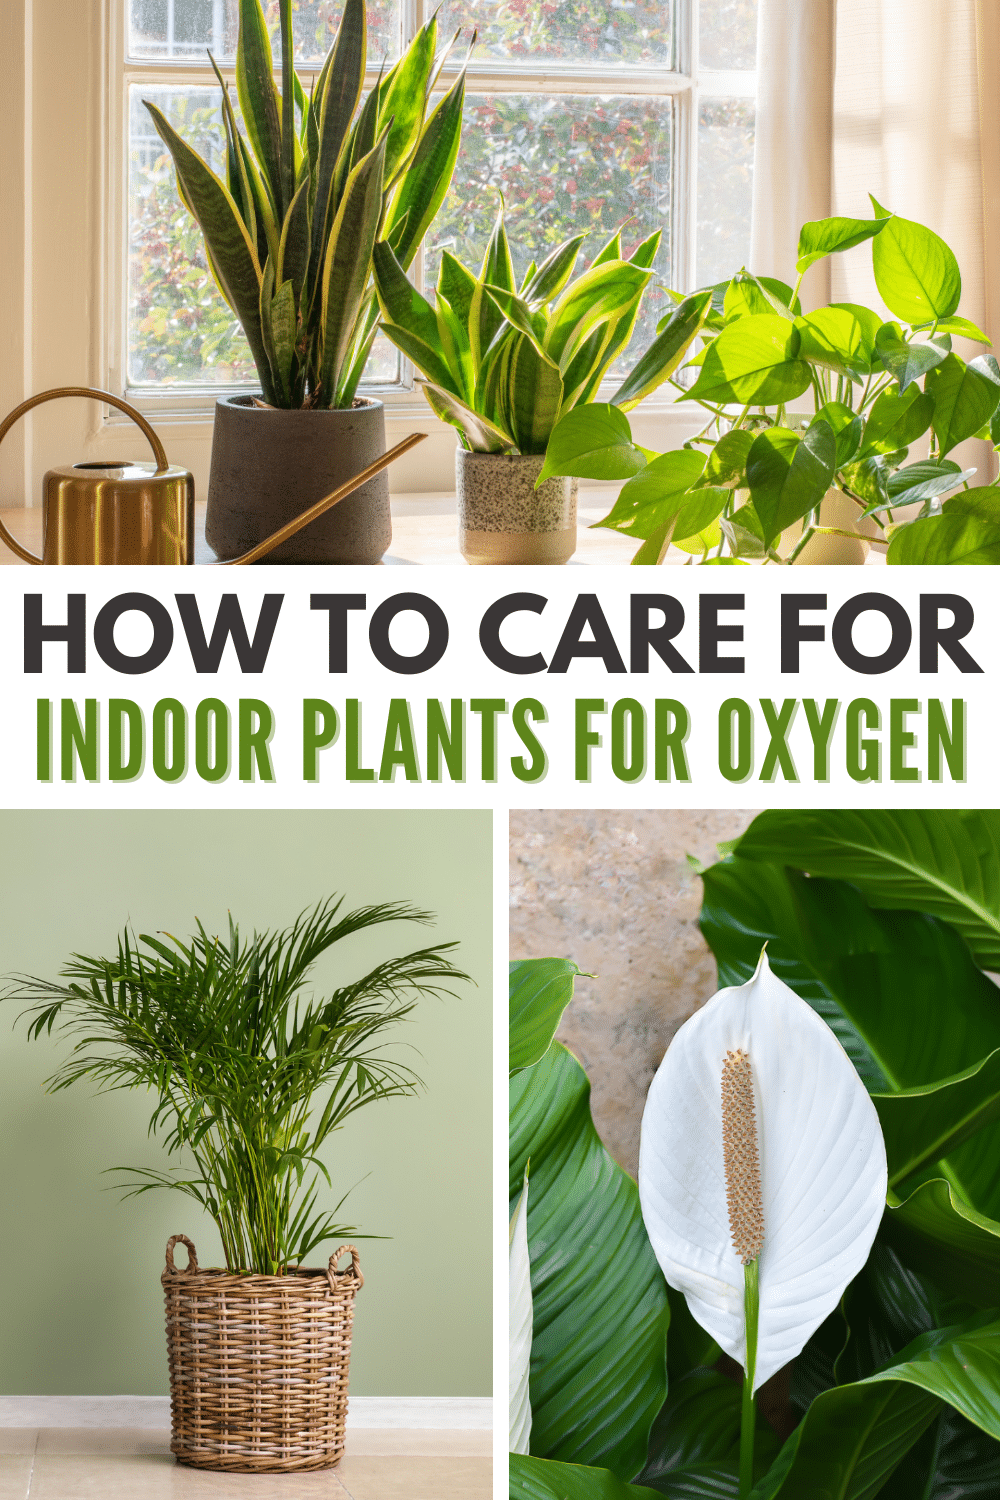 Indoor plants for oxygen images with title text How to Care for Indoor Plants for Oxygen.